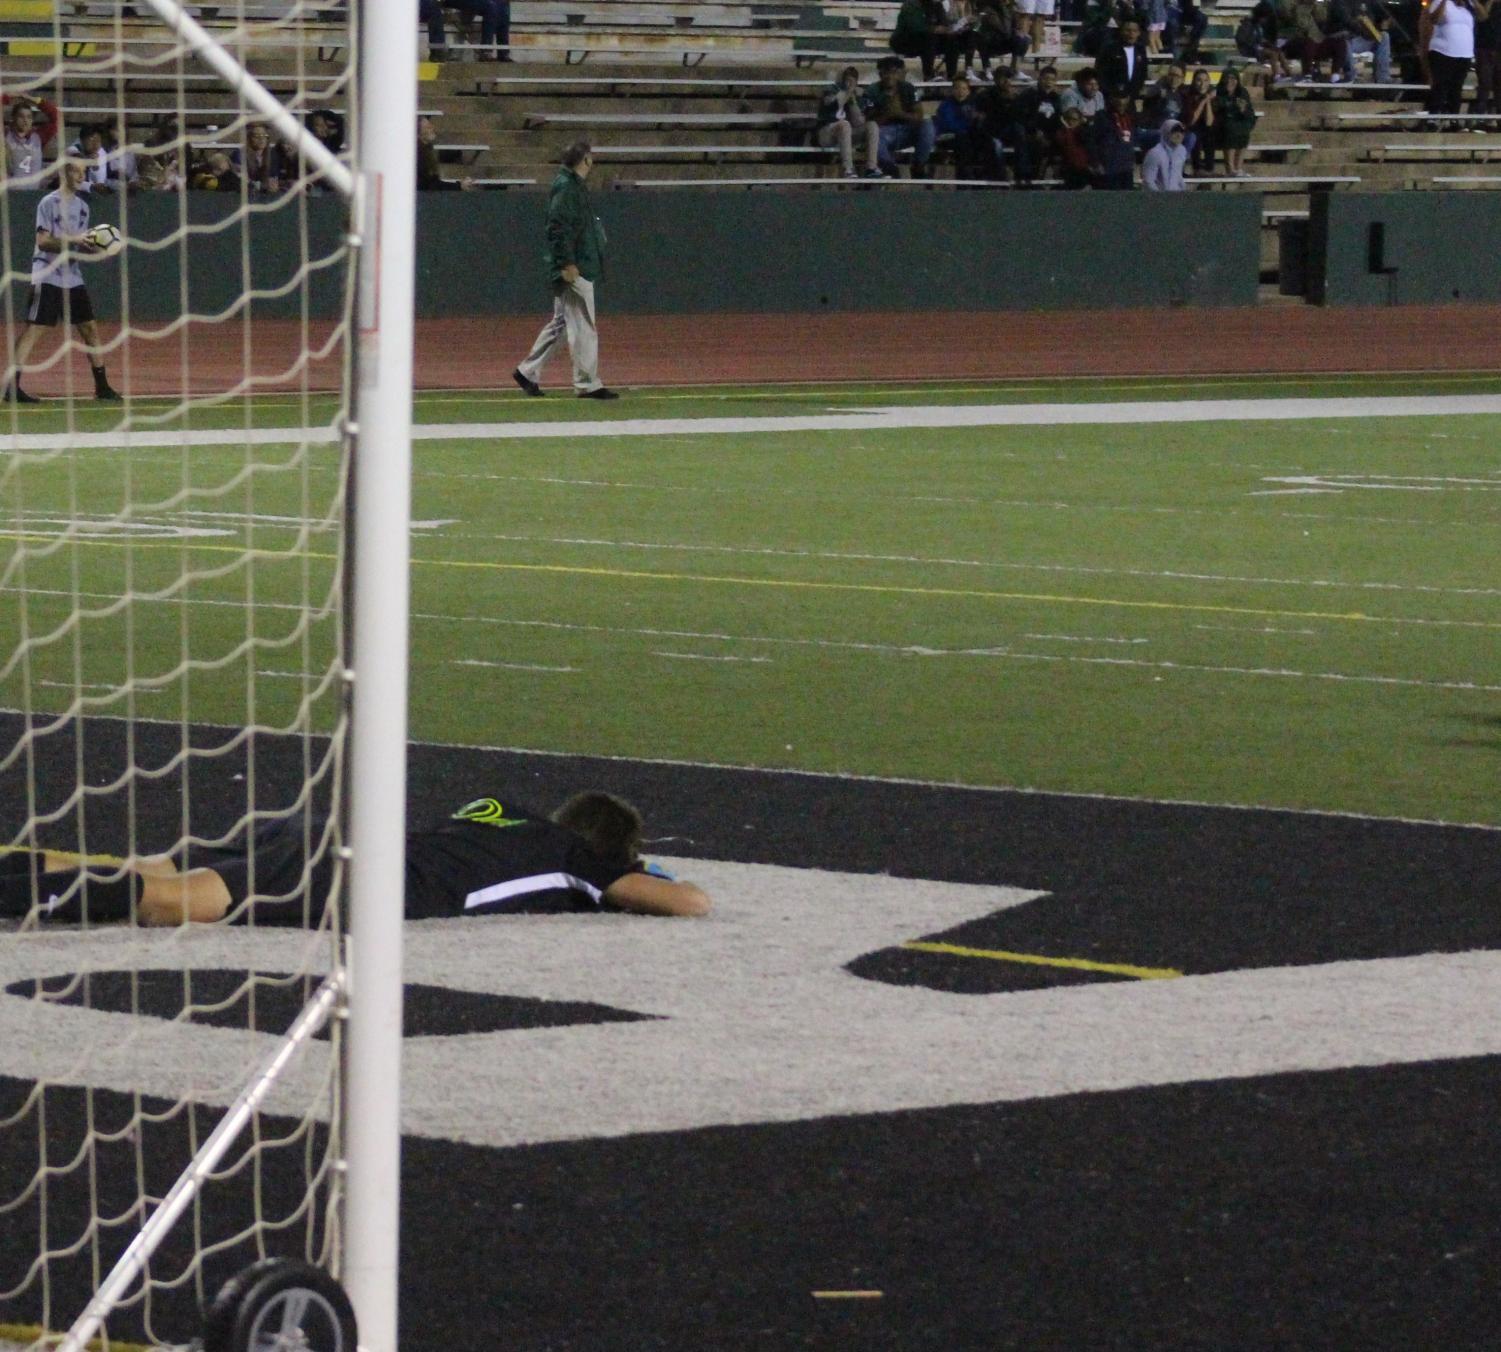 Derby+Vs.+Campus+boys+soccer+photo+gallery+%28Photos+by+Blake+Chadwick%29s